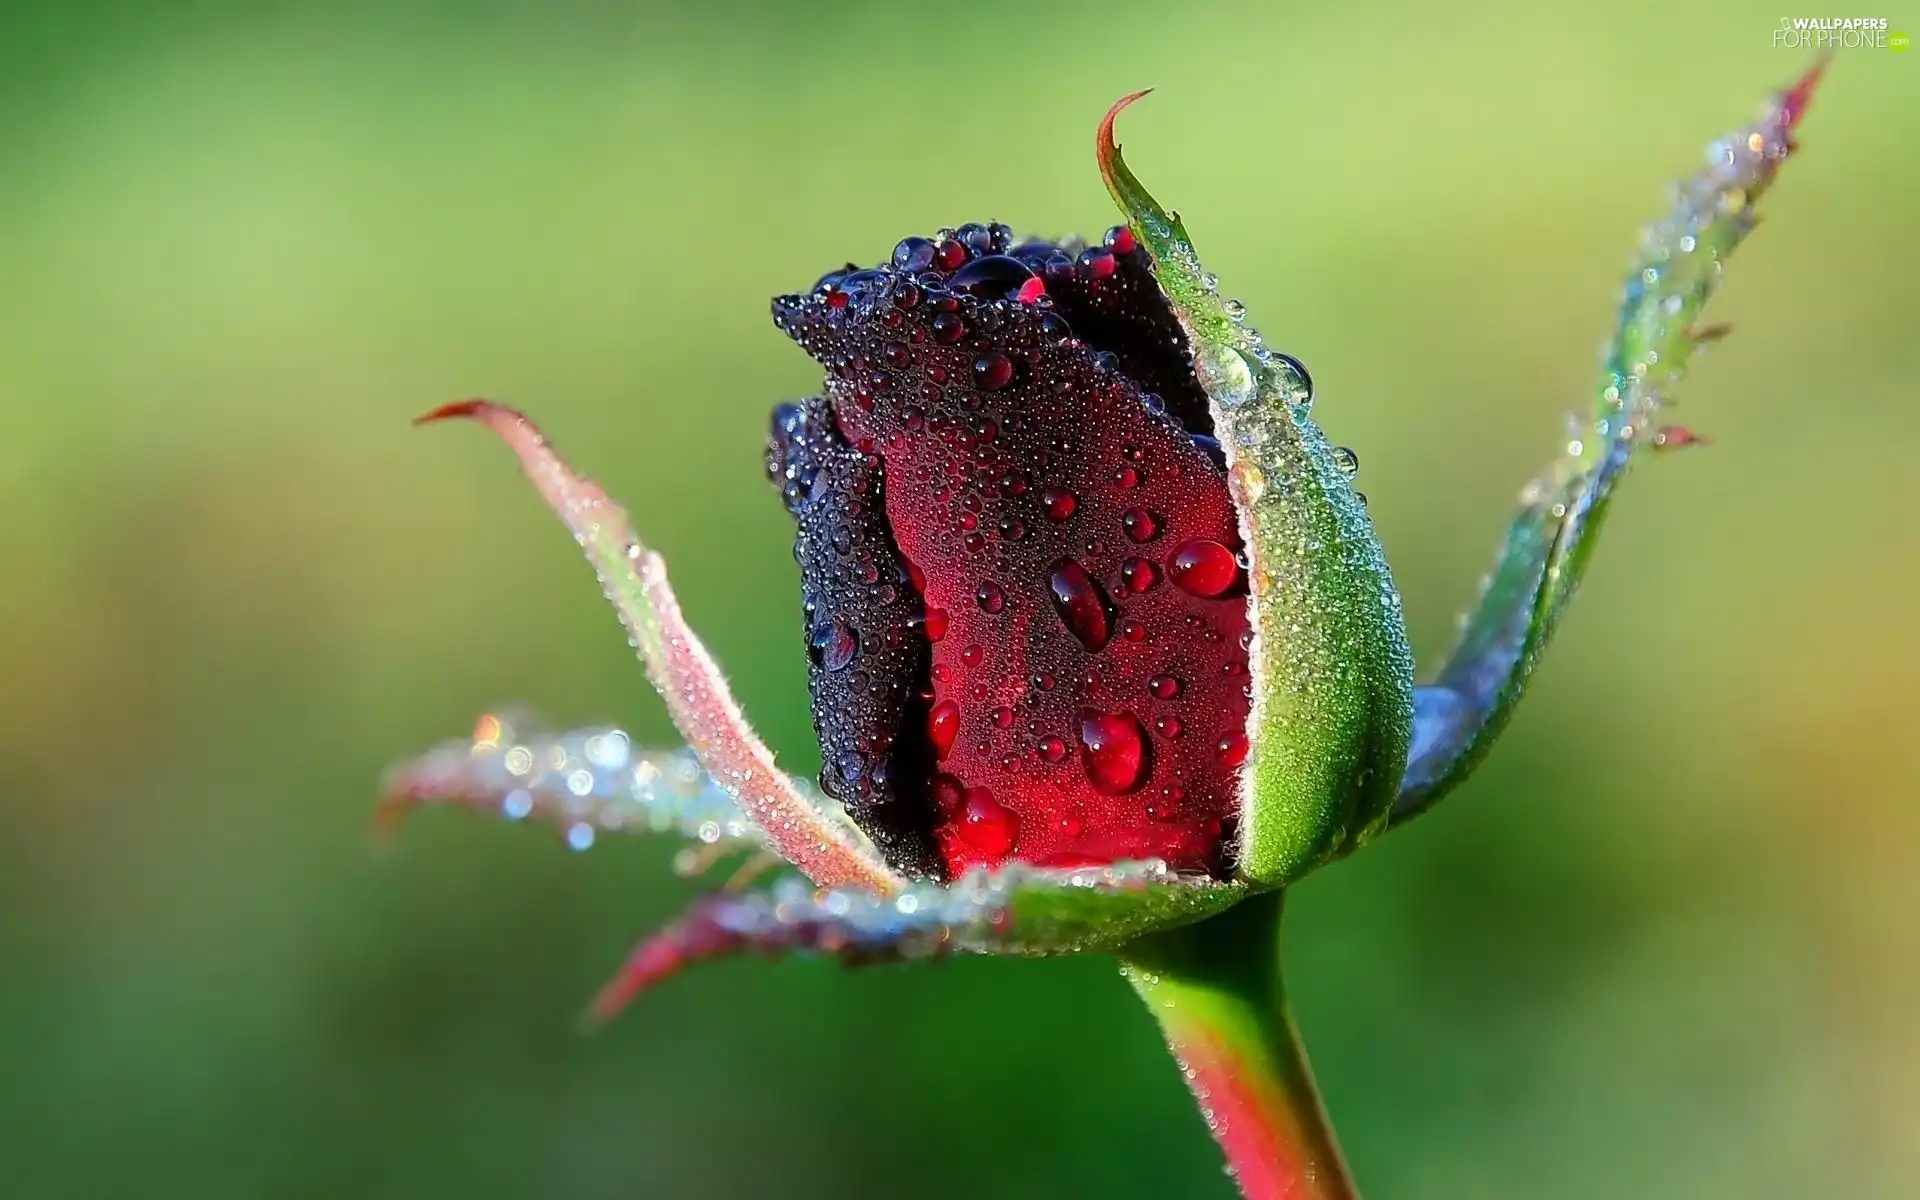 drops, red hot, rose